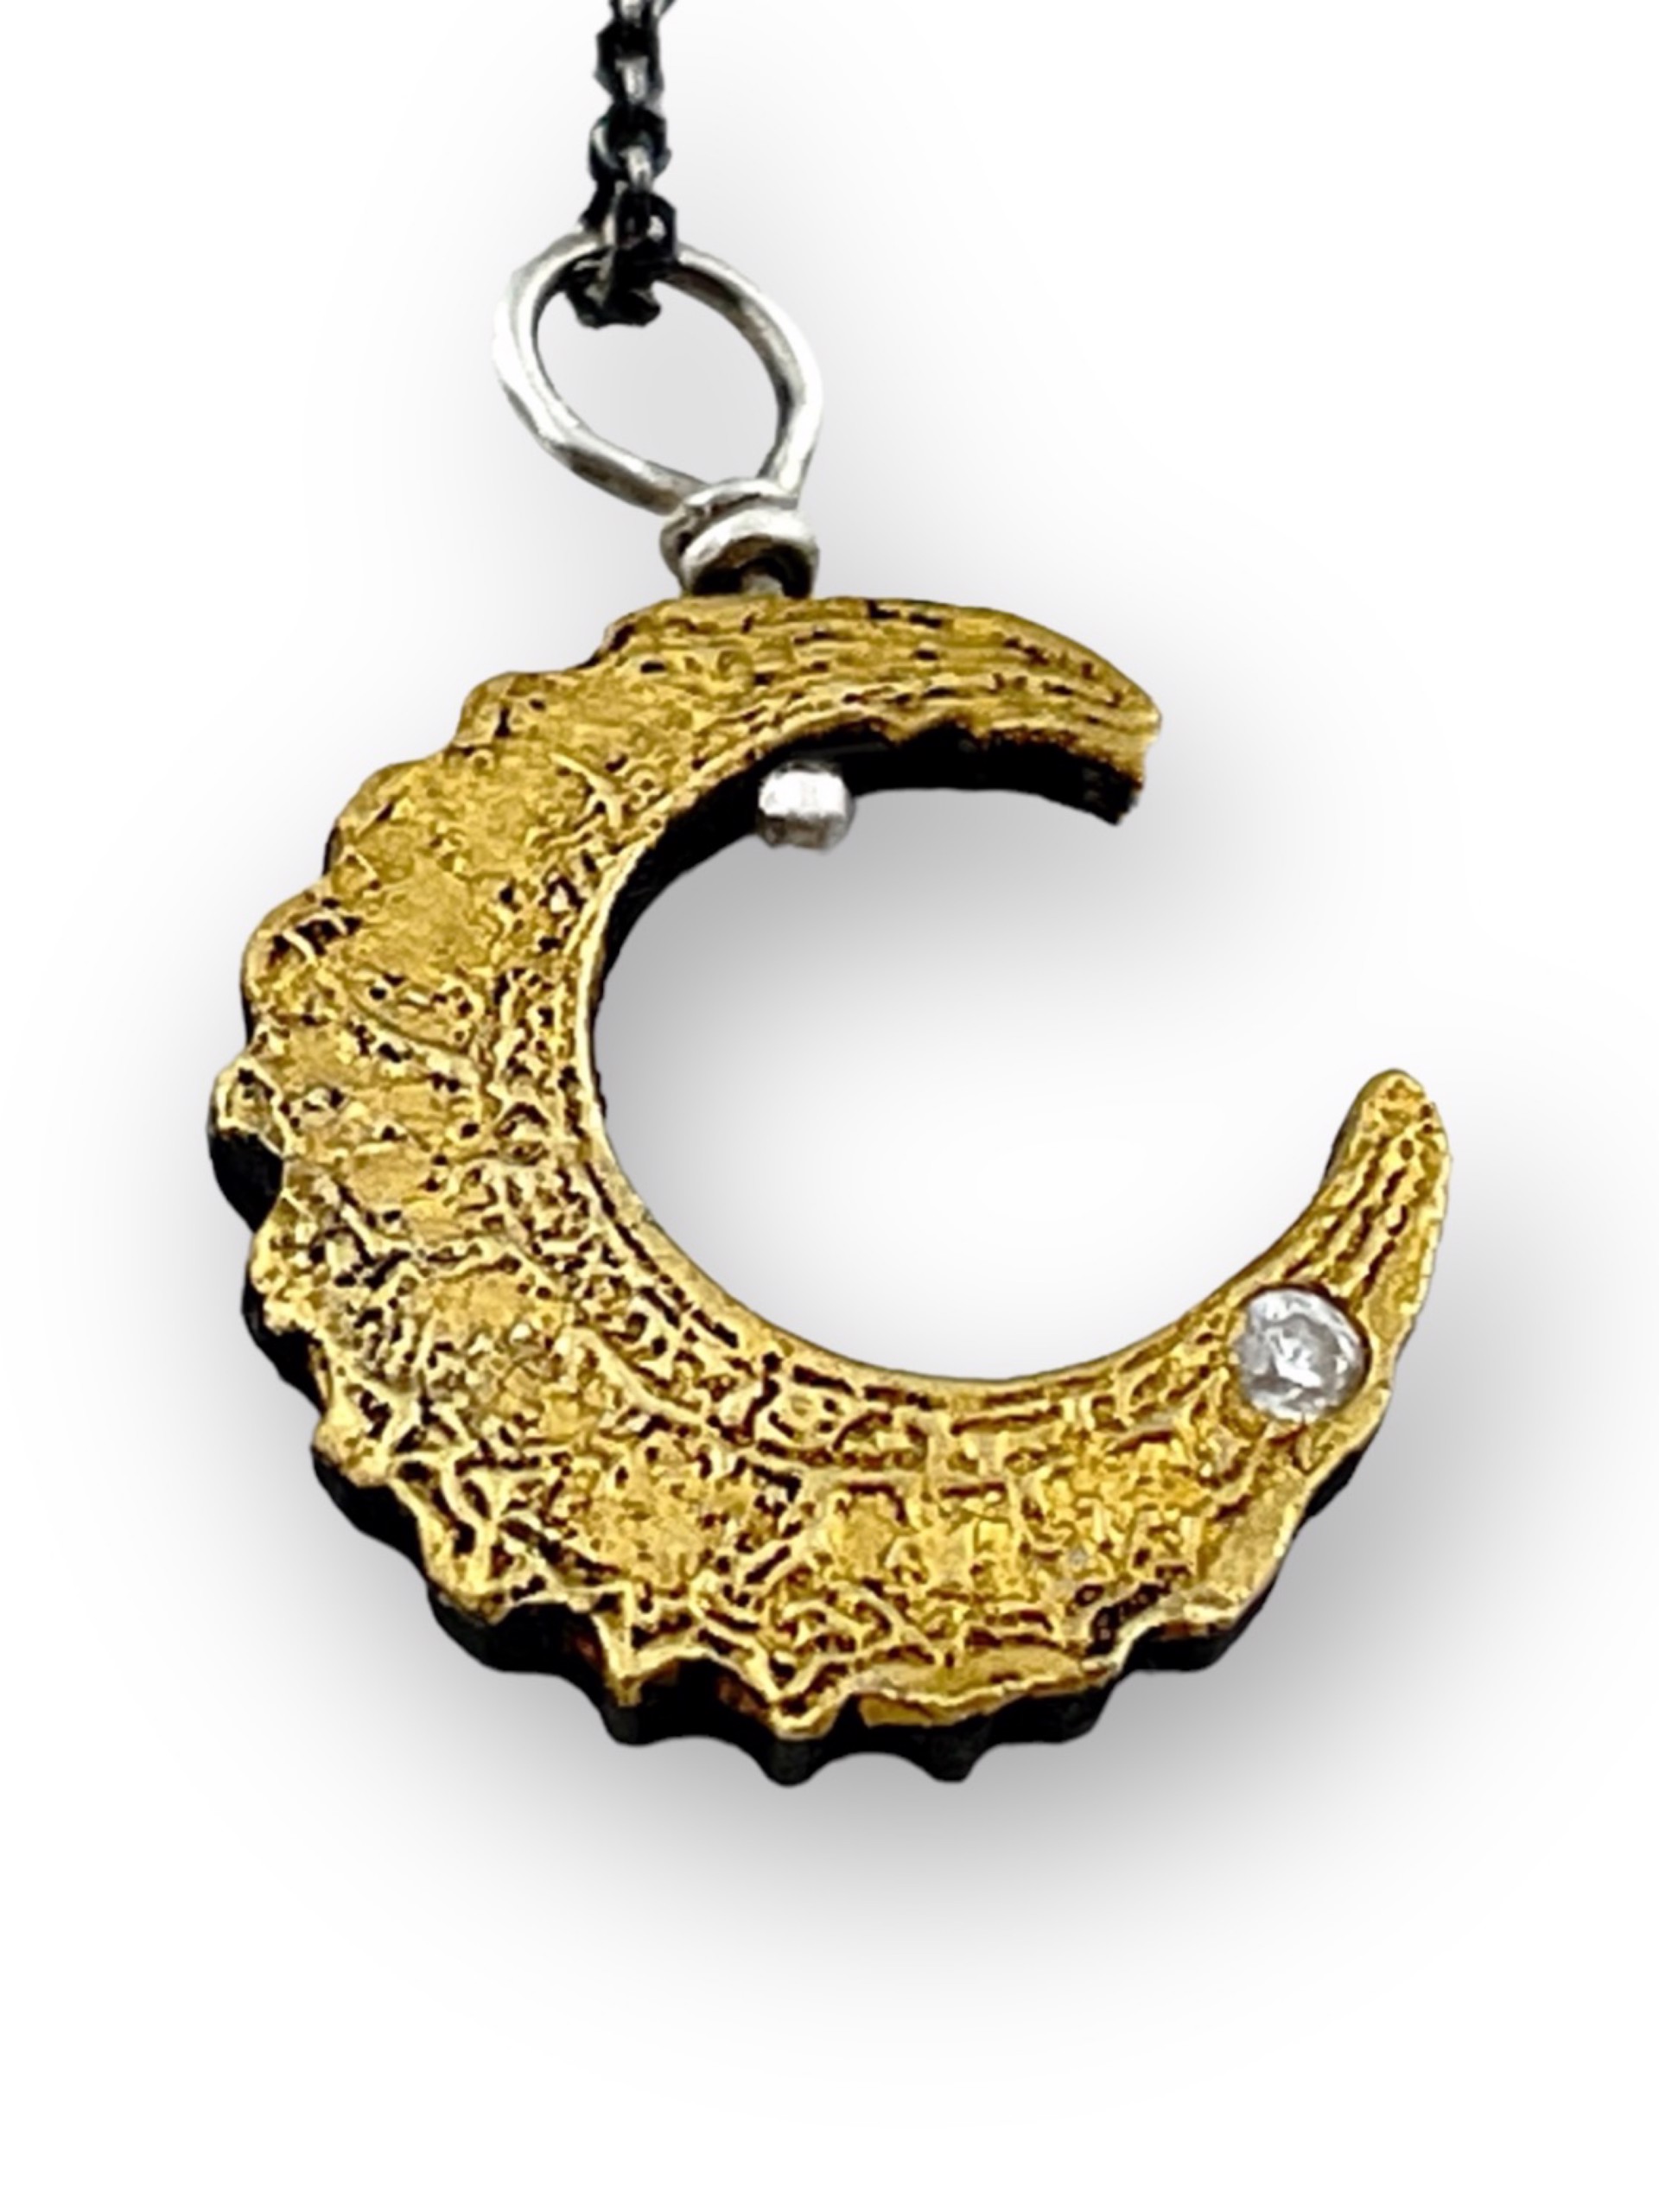 Lace Moon Pendant by Terry Williams Brau